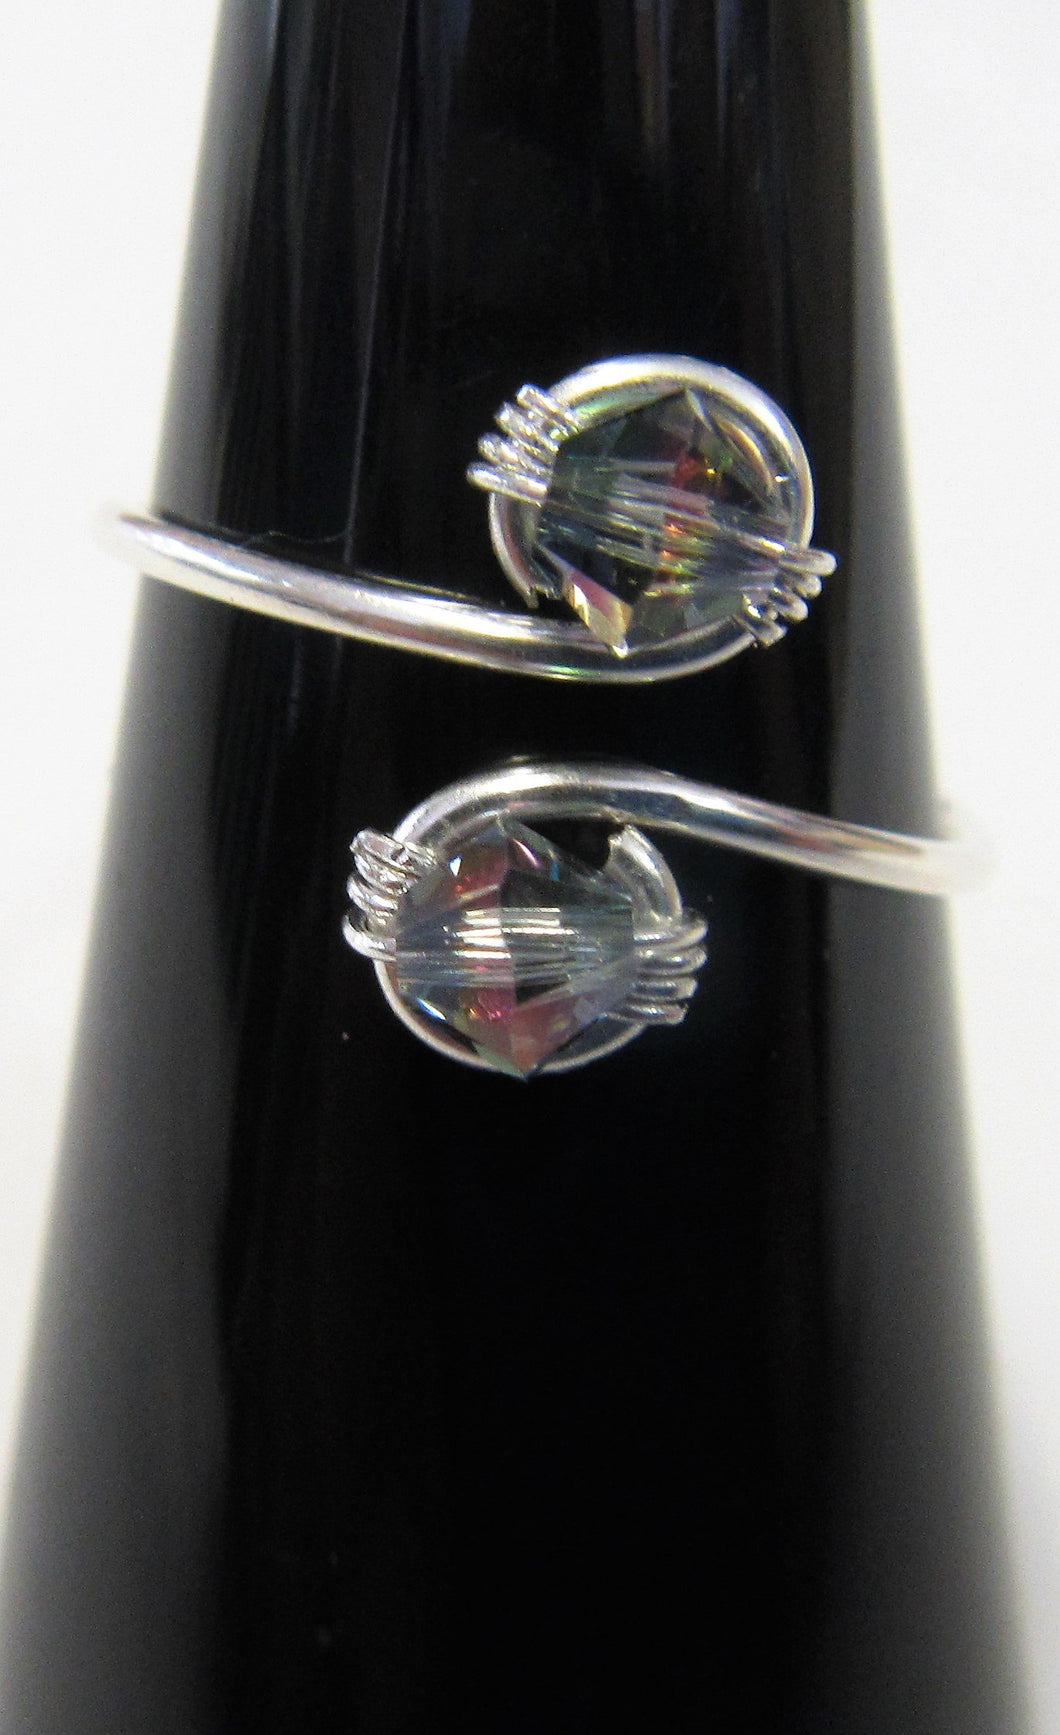 Handcrafted sterling silver wire ring with rainbow swarovski crystals Size N+